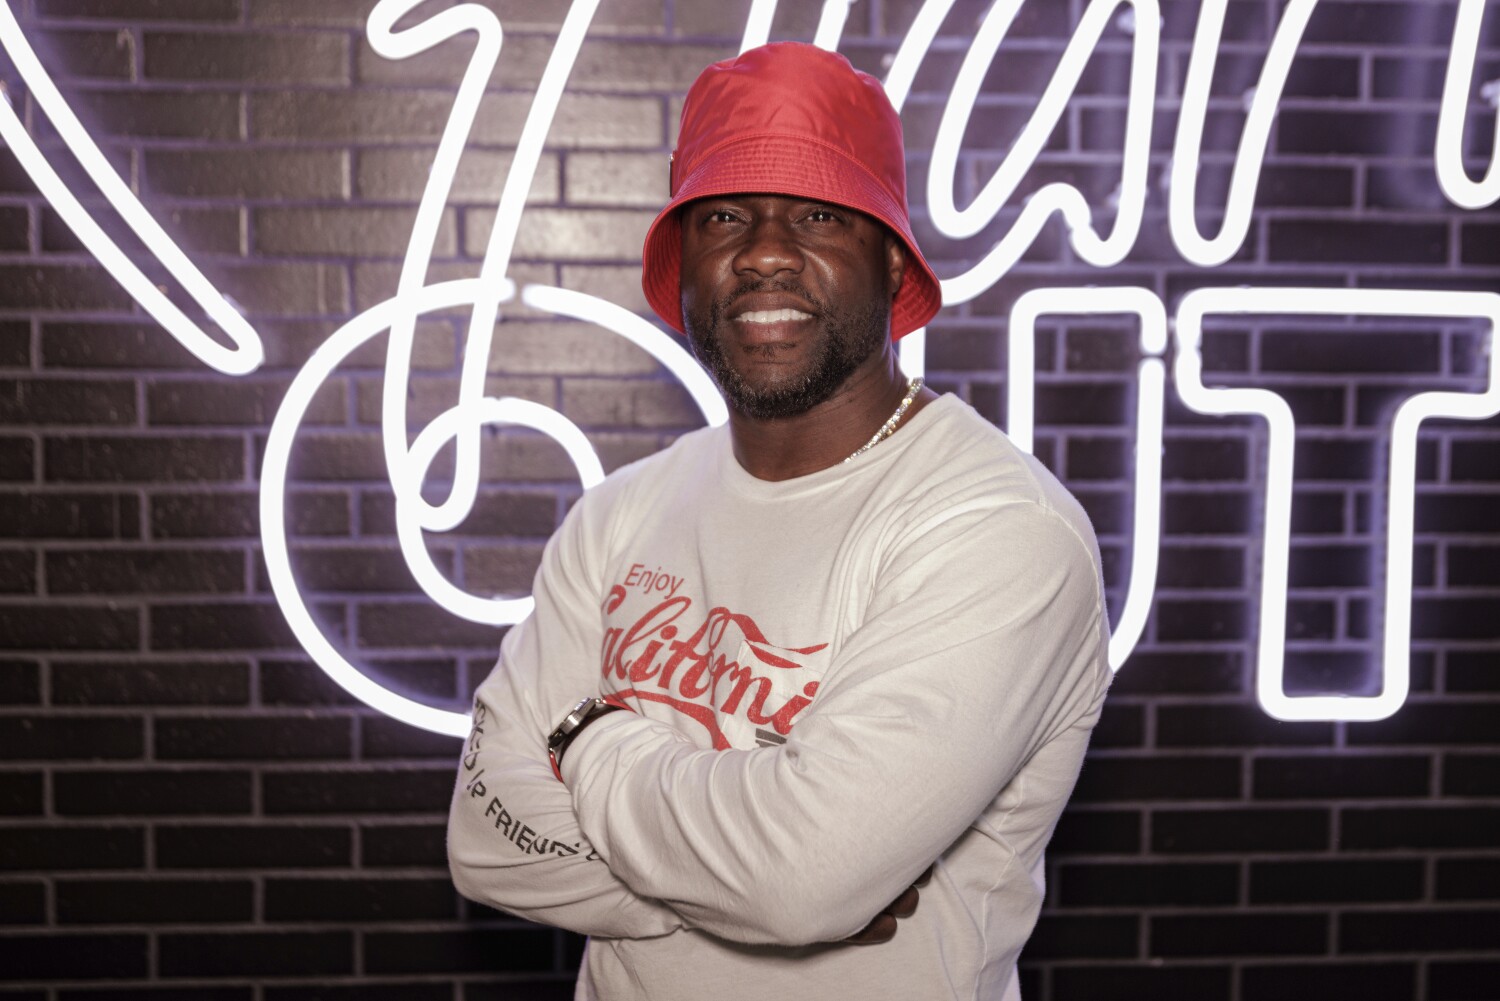 Kevin Hart's new vegan fast-food restaurant in L.A. lures hundreds on opening day